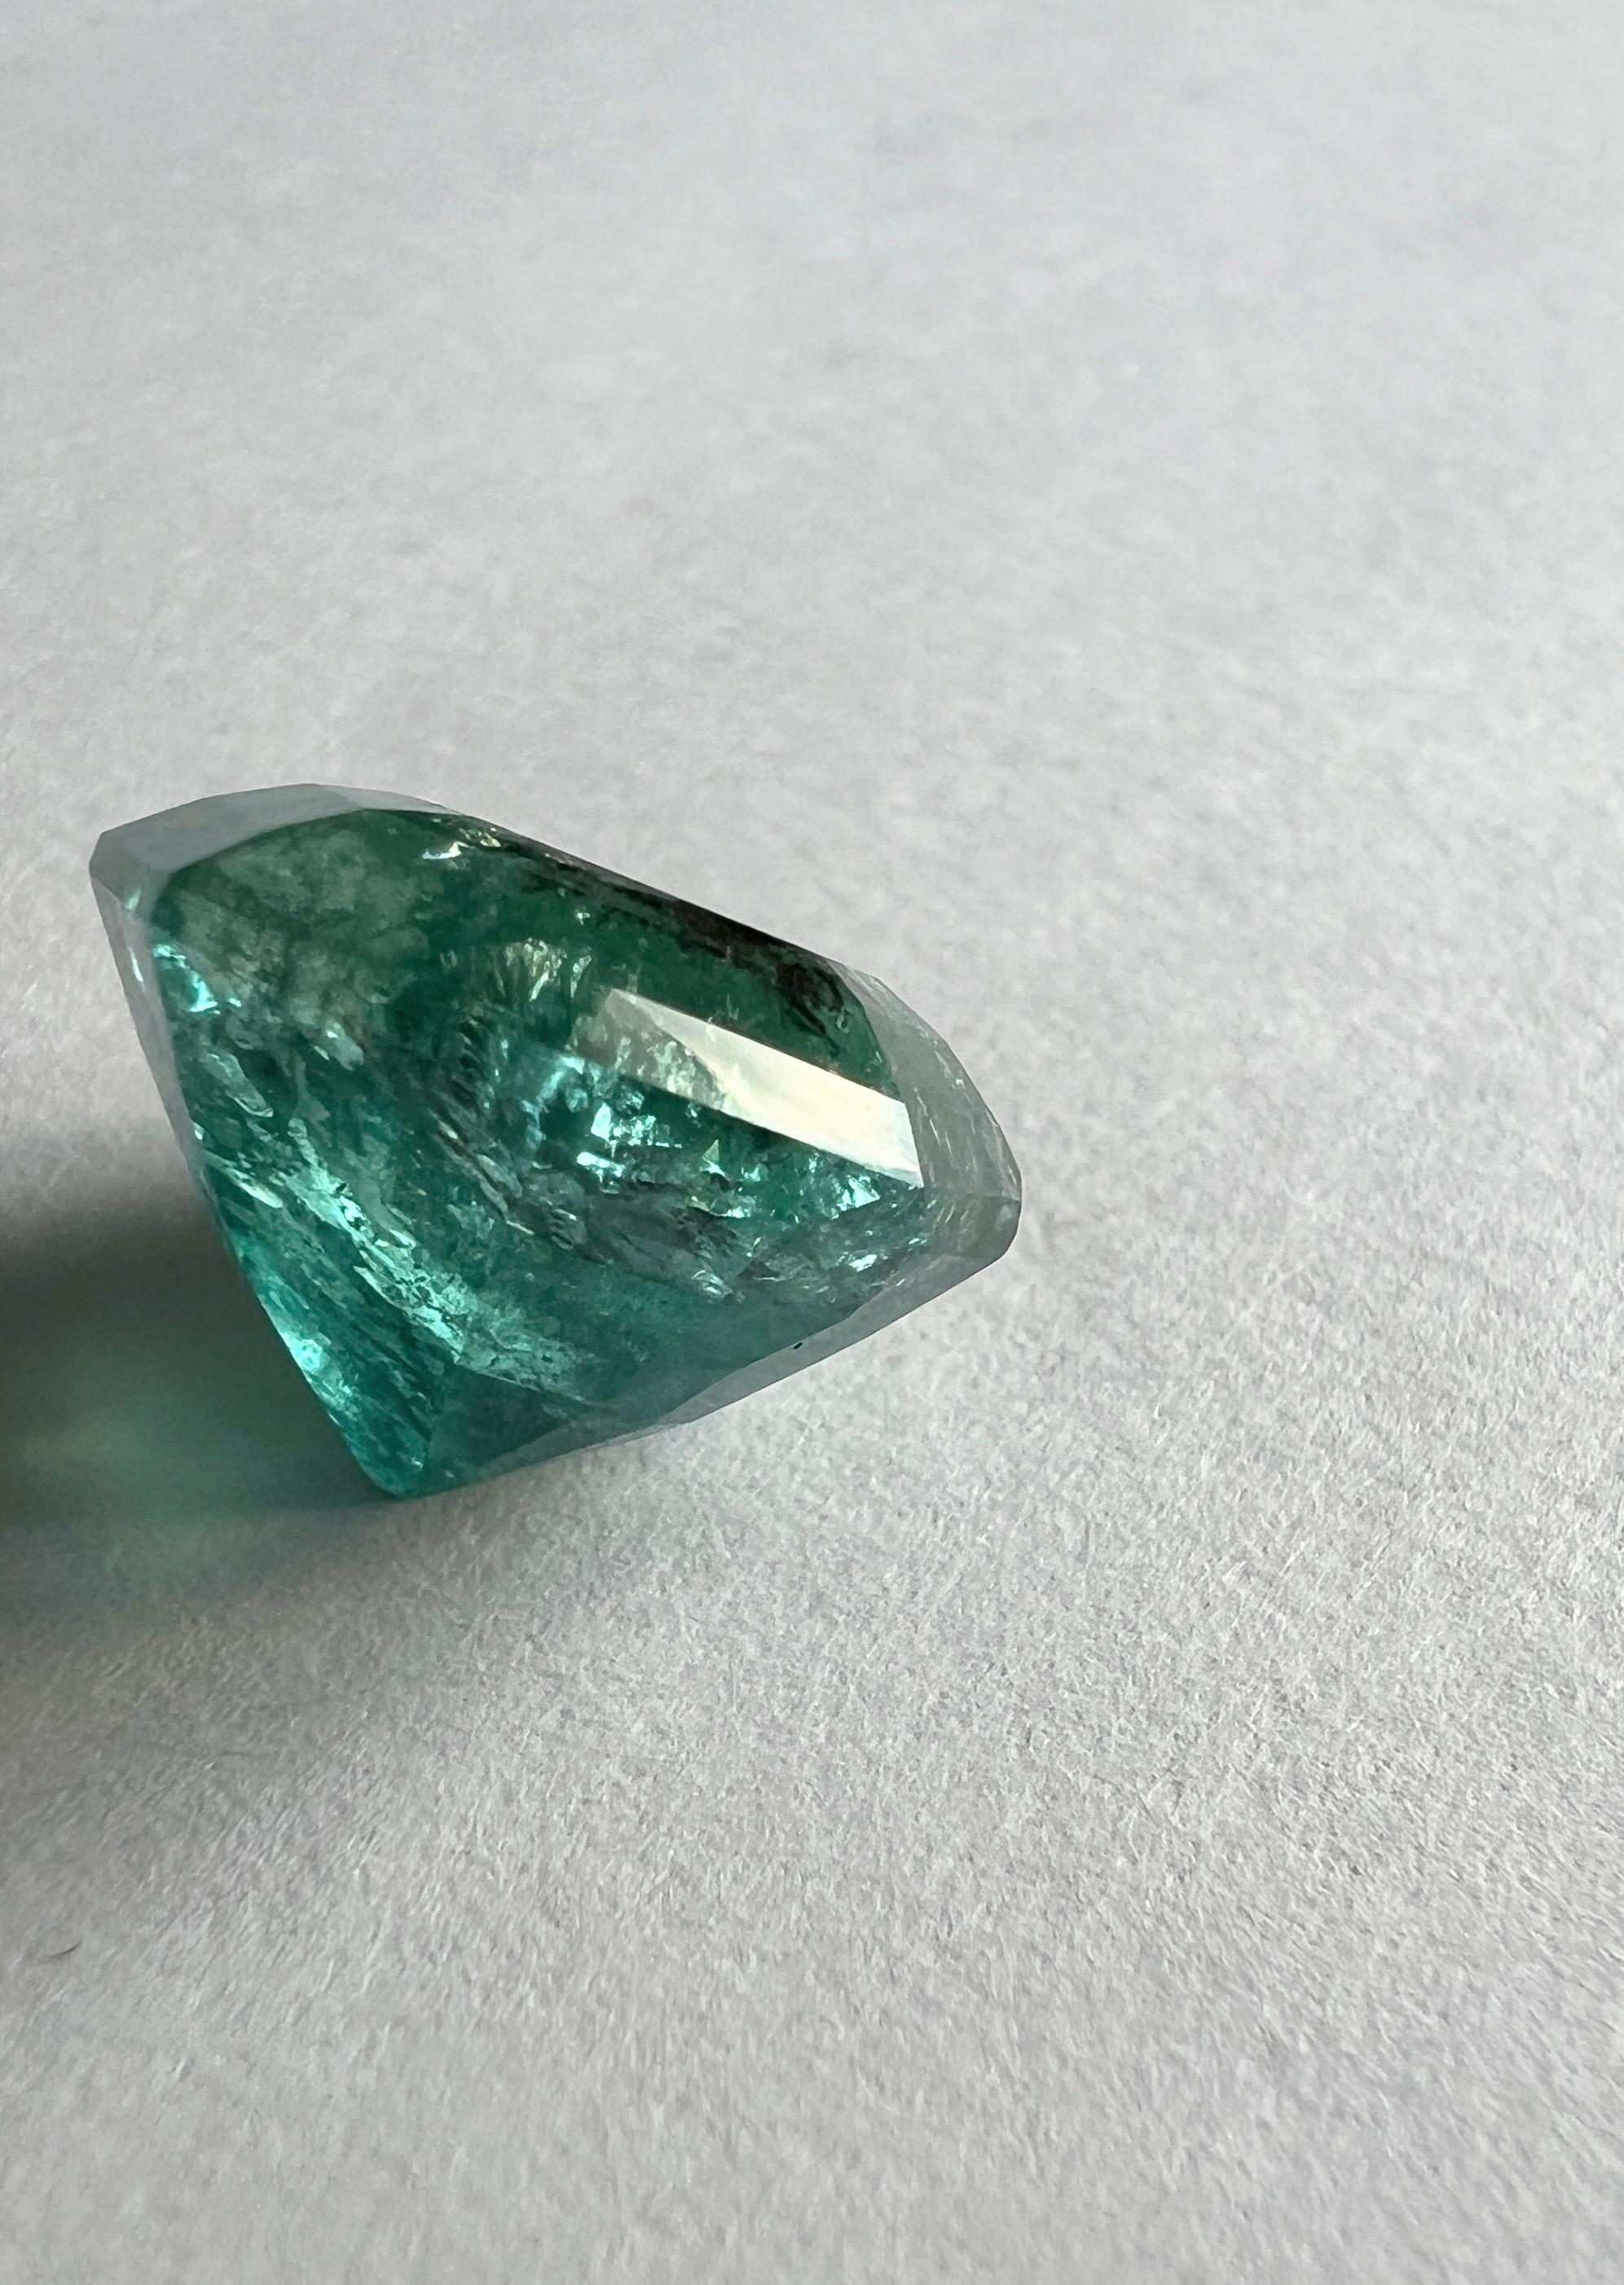 8.85ct Asscher Cut No-Oil Natural Untreated Emerald Gemstone In New Condition For Sale In Sheridan, WY